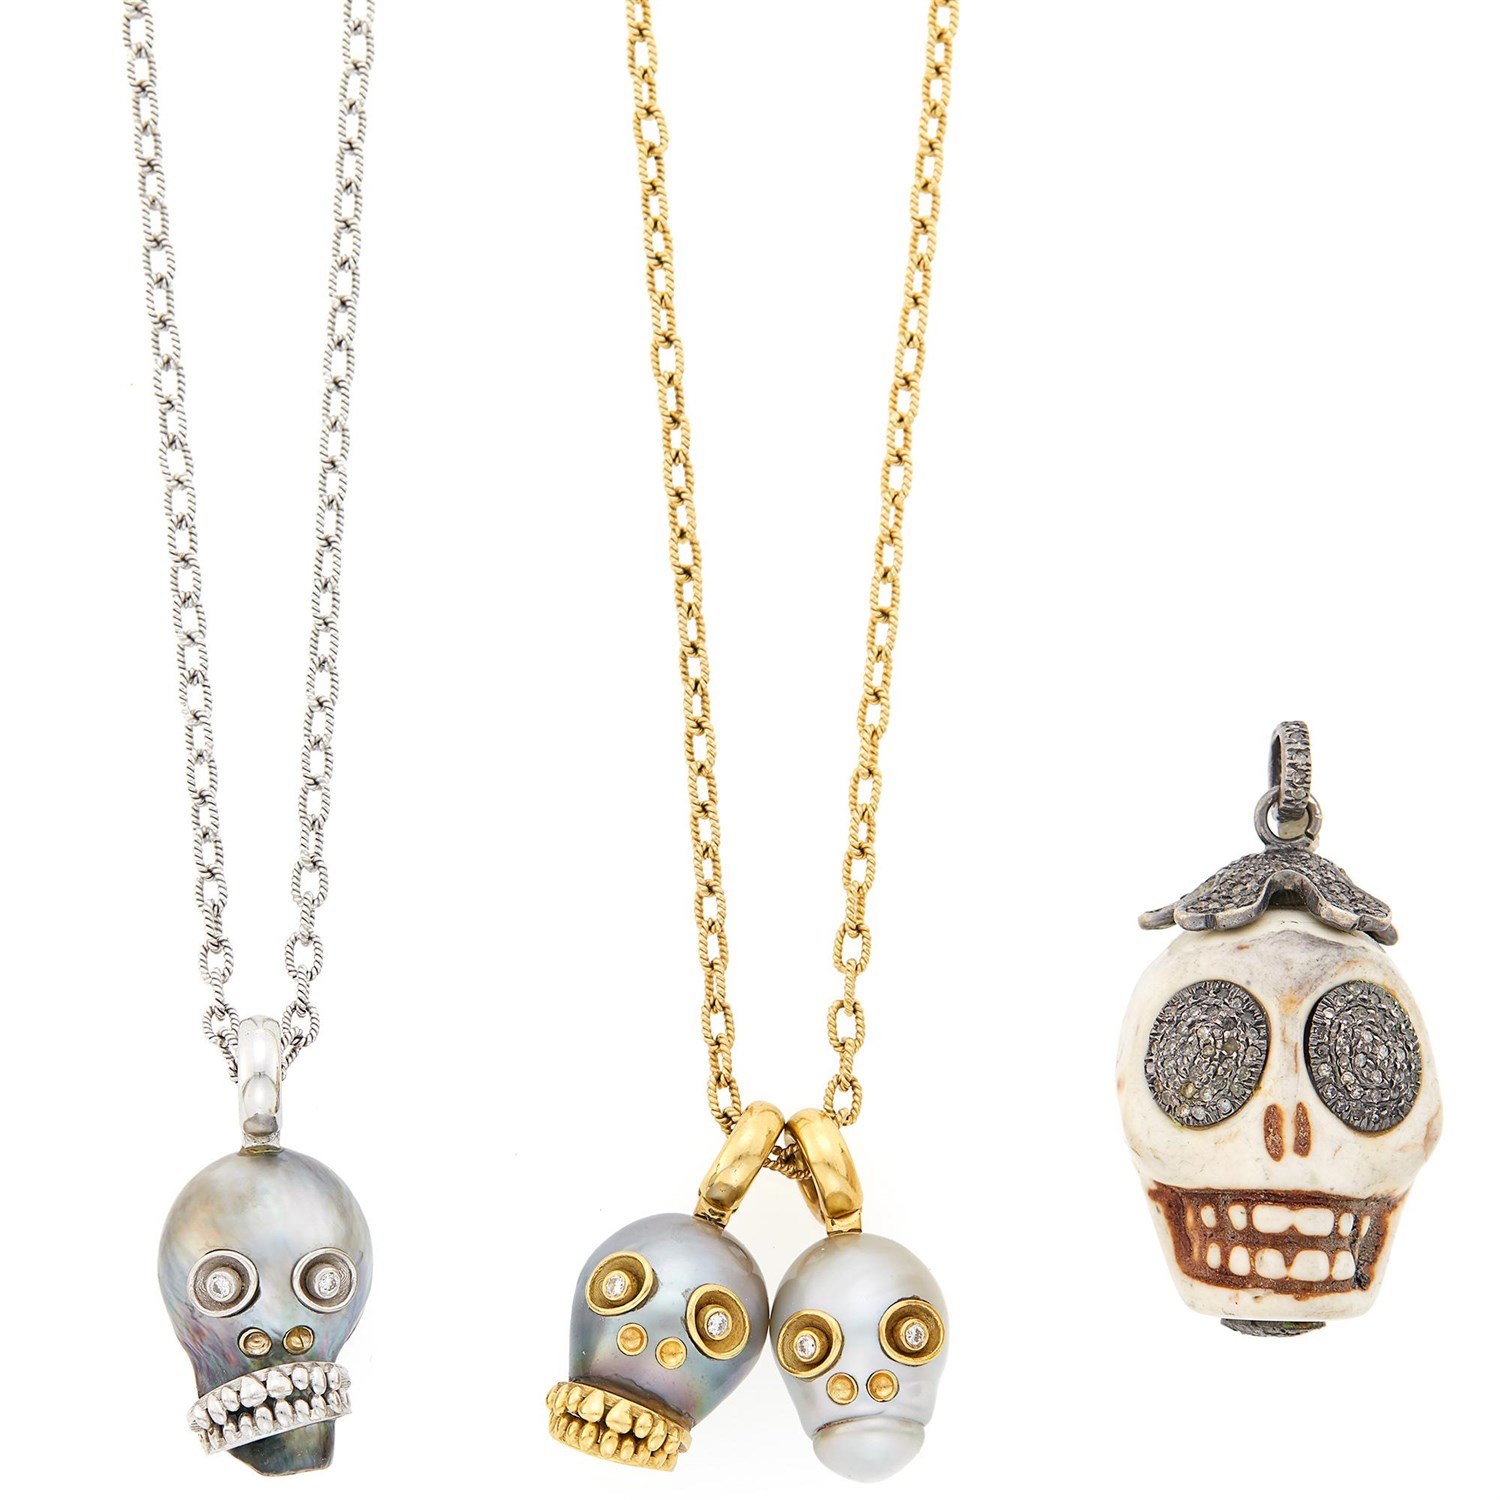 Lot 1056 - Four Gold, Gray and White Baroque South Sea Cultured Pearl, Carved Hardstone and Diamond Skull Pendants with Two Long Chains